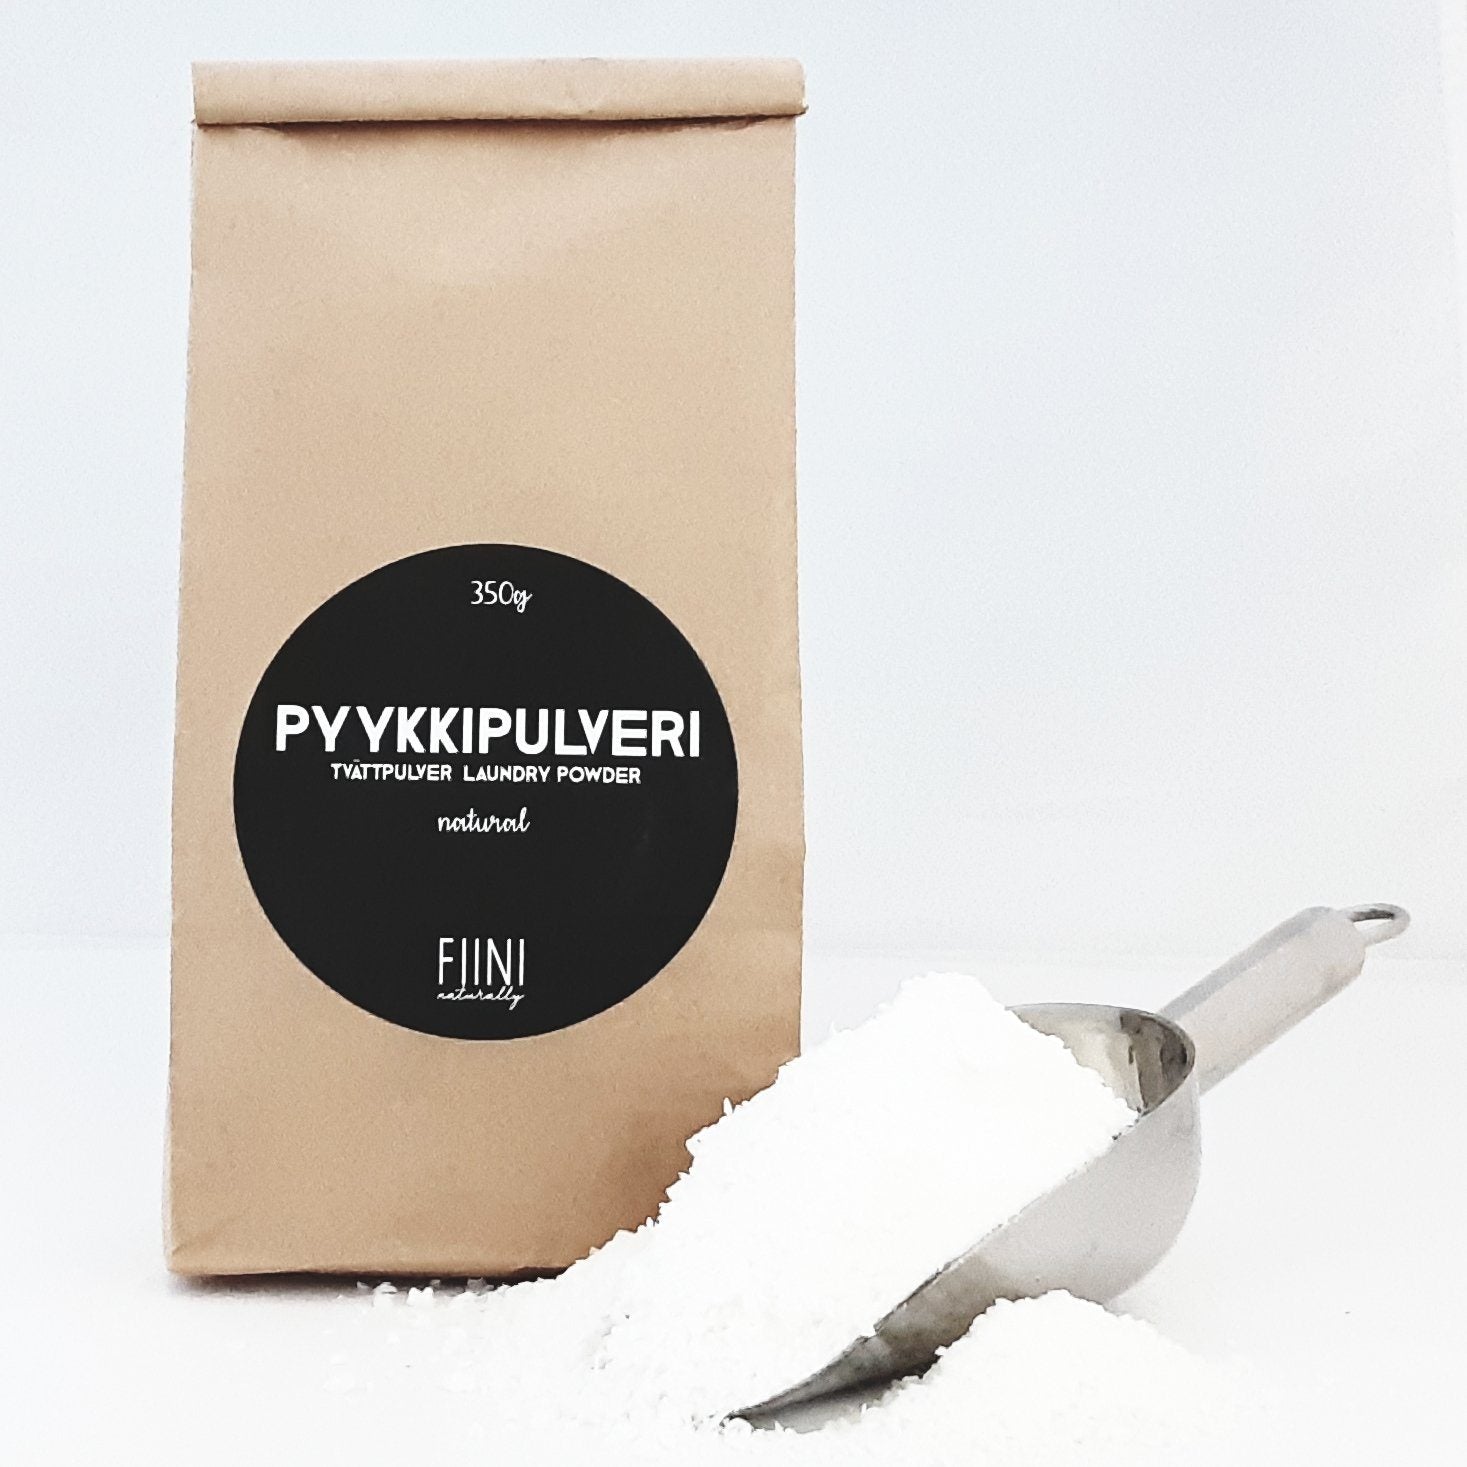 Fiini Powder Laundry Detergent, 350 g Care products